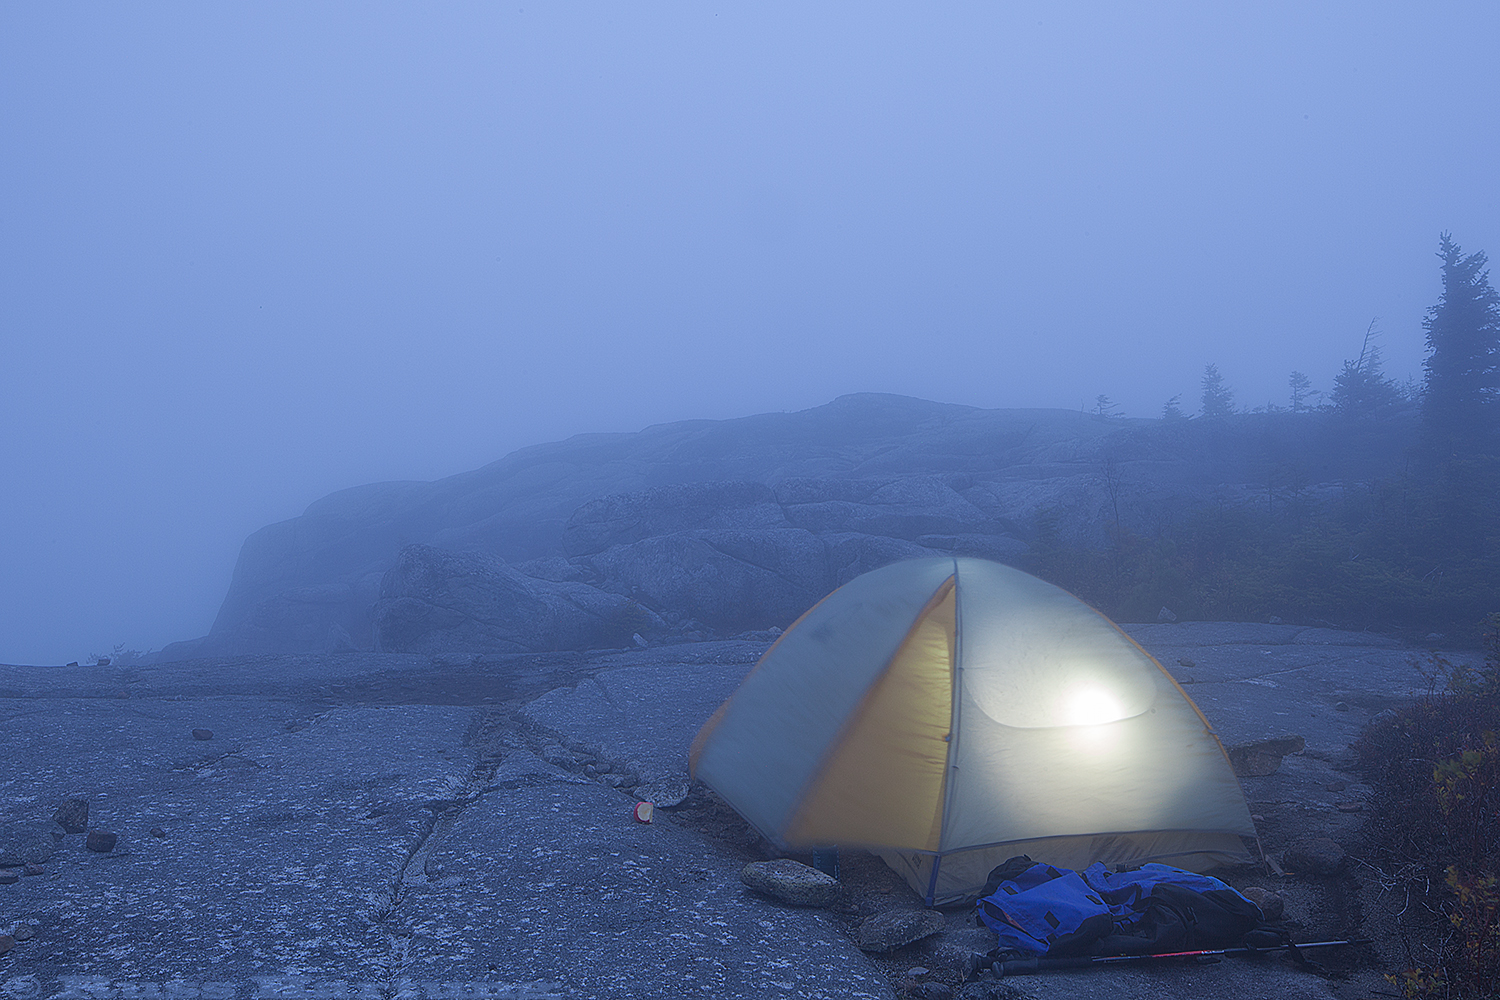 I spent the night on a ridge off the trail so I could do some sunrise photography. Instead I woke up to wind and thick fog. 